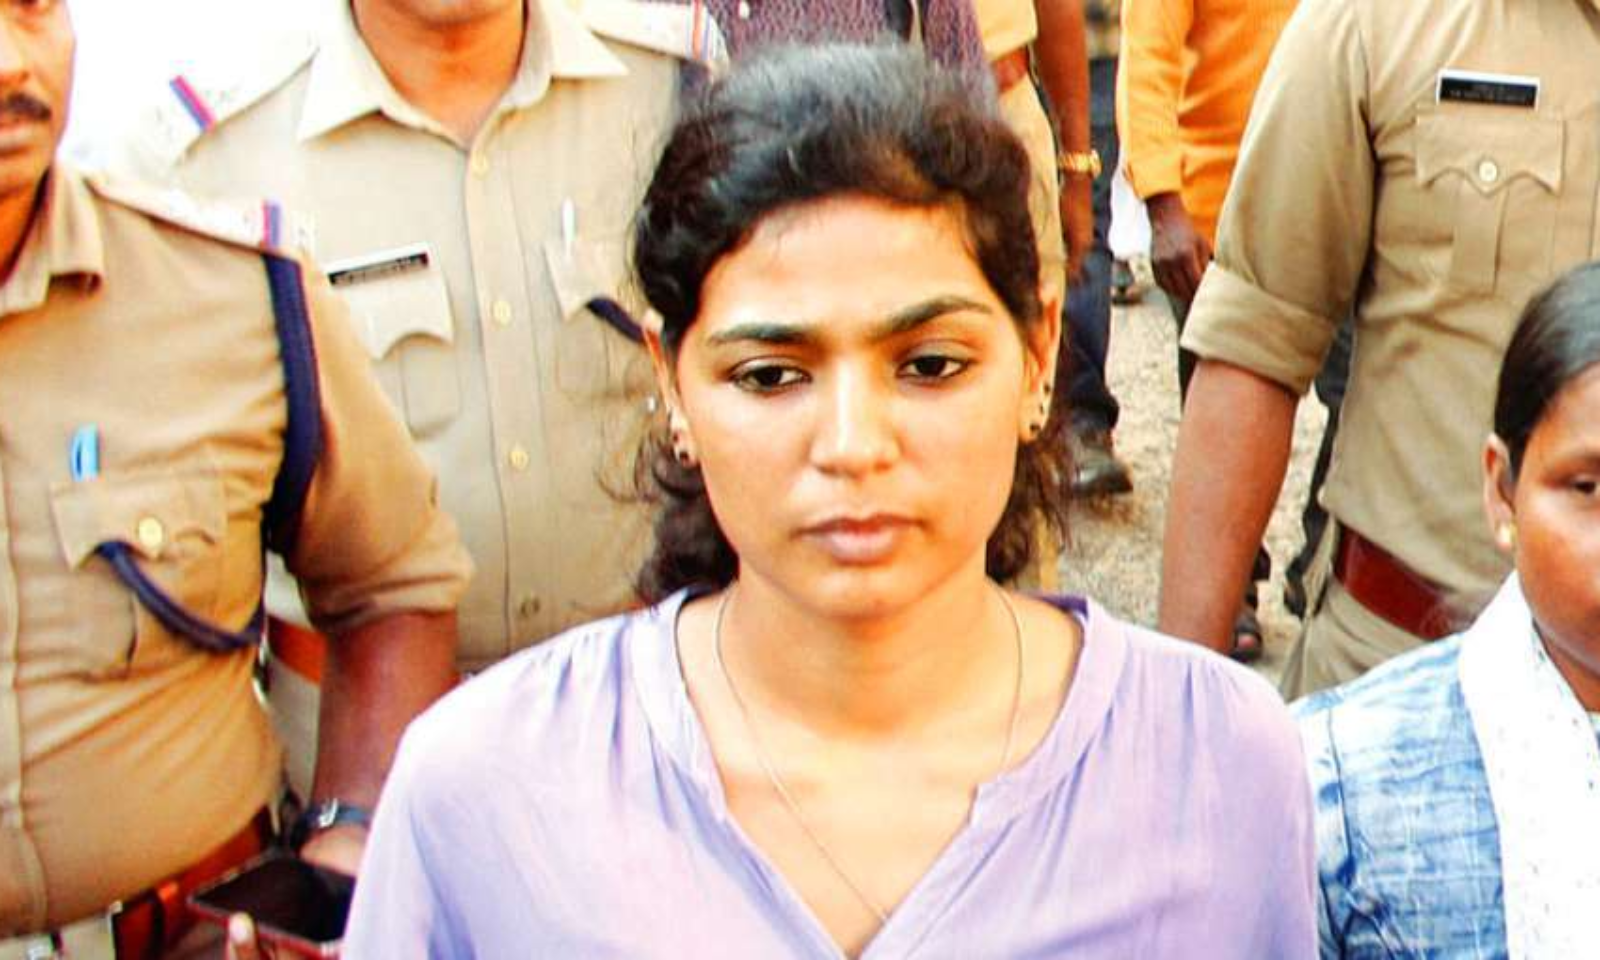 1600px x 960px - How Can You Use Children For This?': SC Refuses Pre-Arrest Bail To Rehana  Fathima In POCSO Case Over Video Showing Her Children Painting On Her  Semi-Nude Body [Read Order]